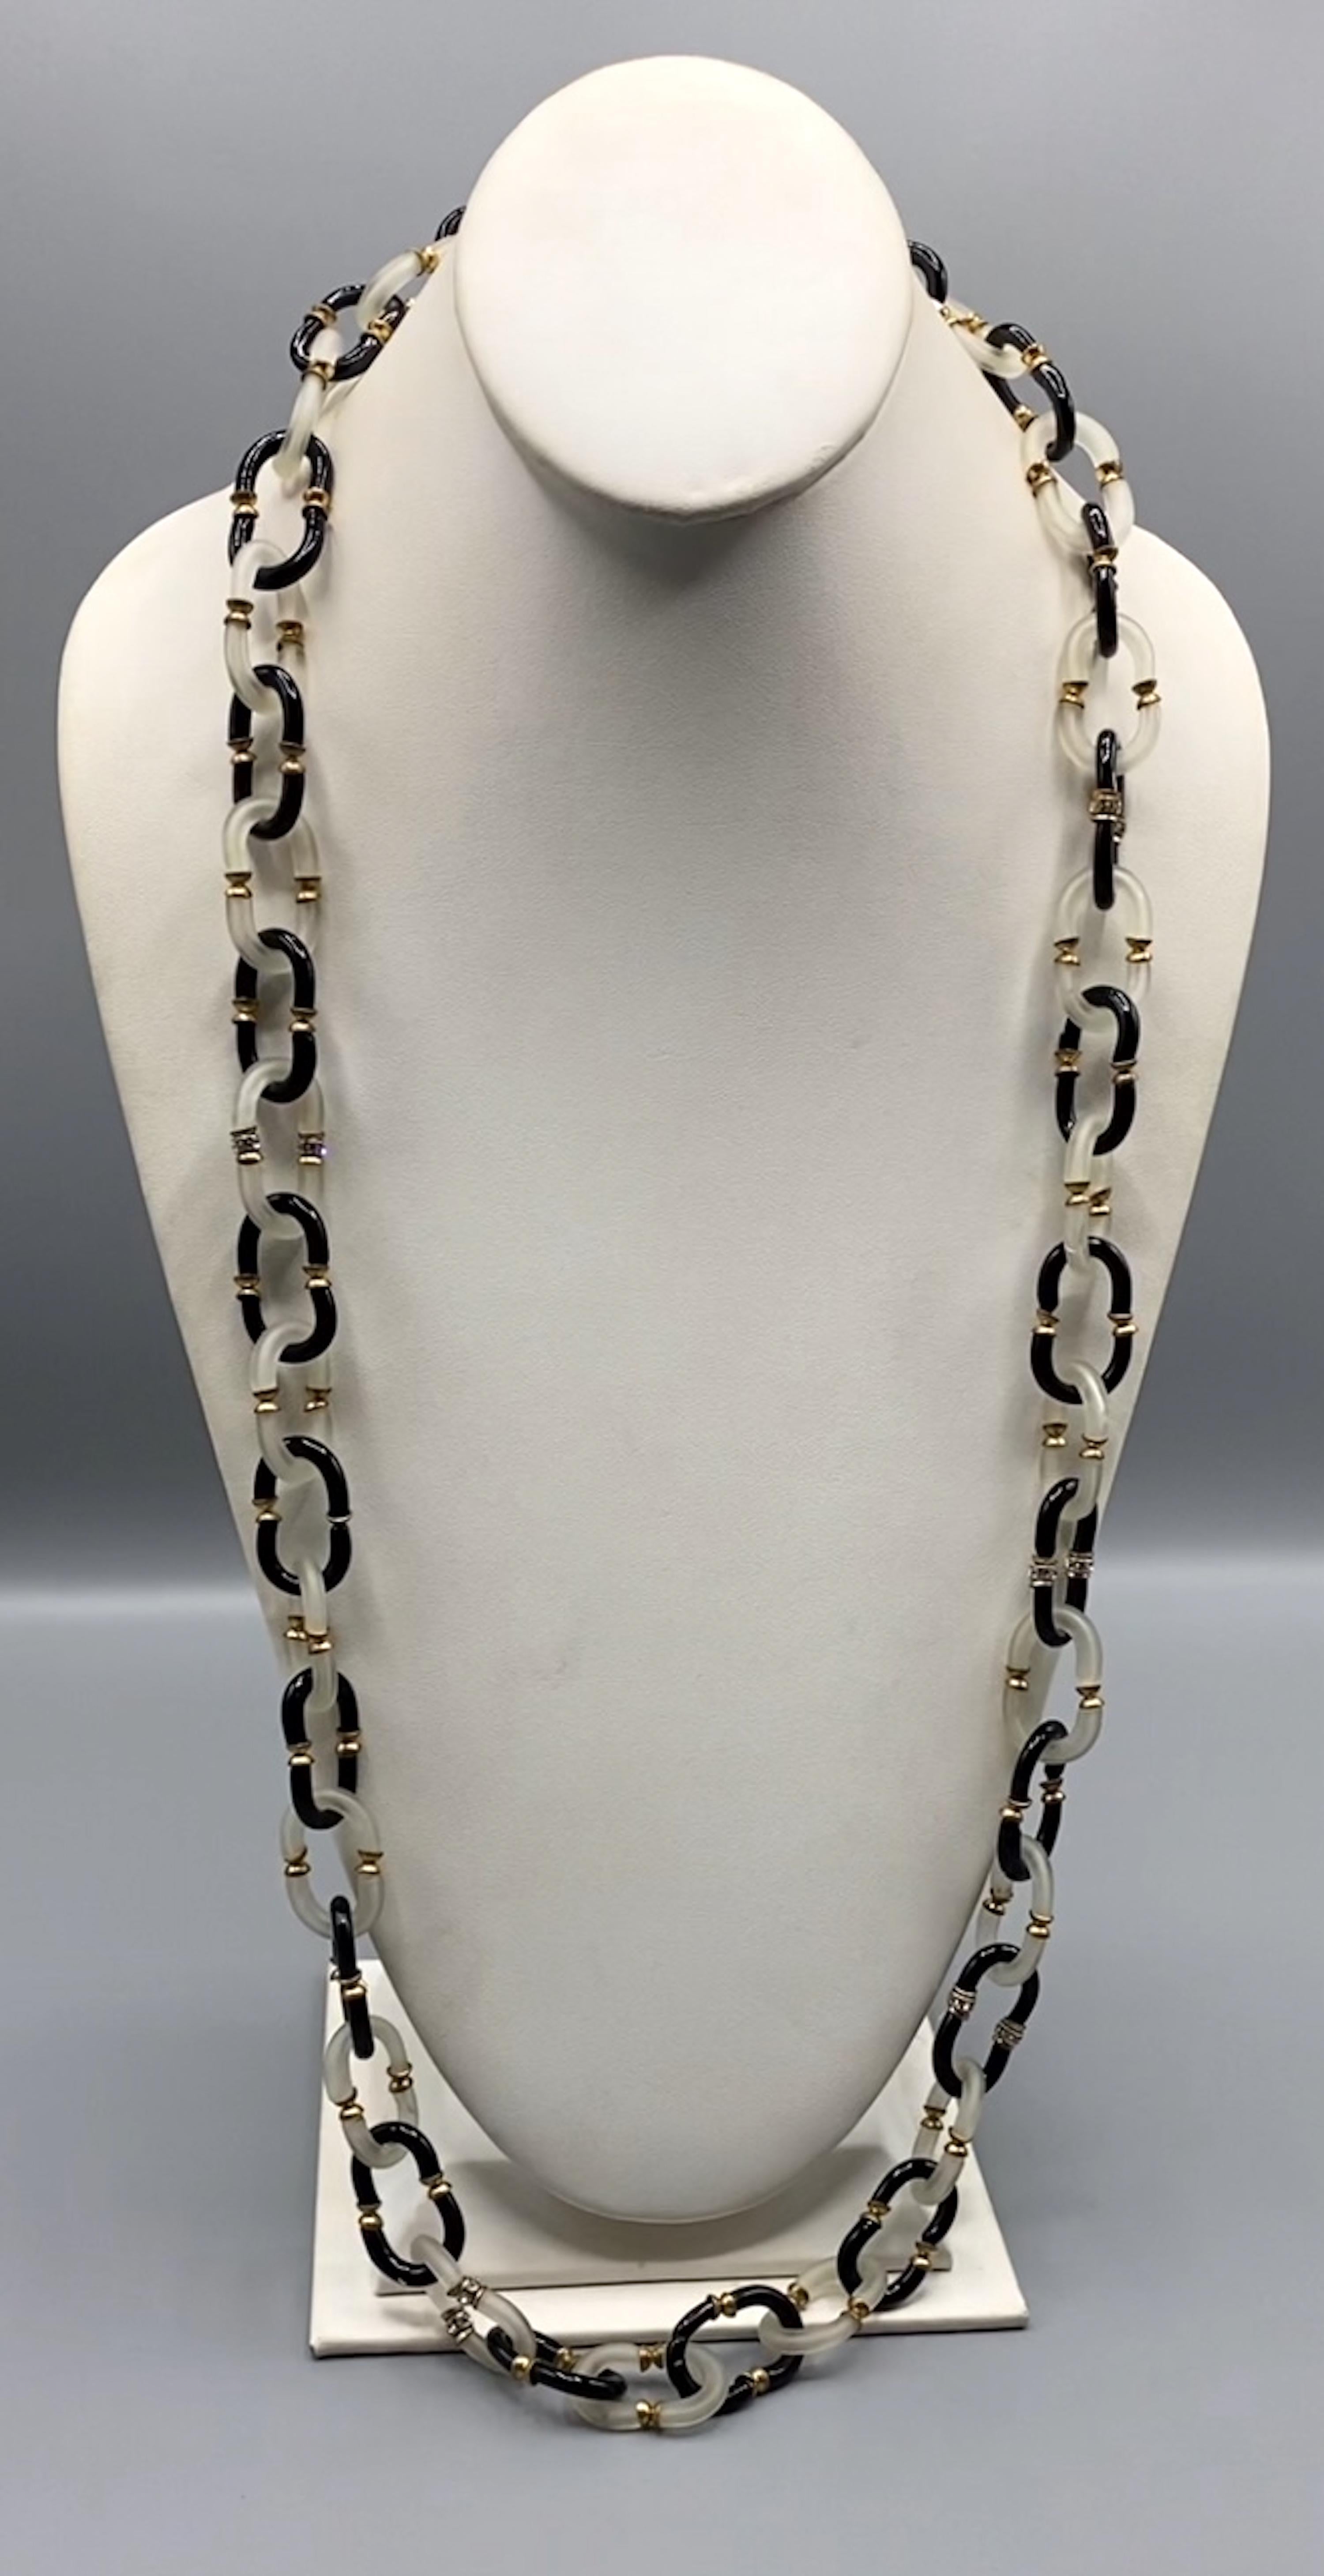 Lovely glass chain necklace by Archimede Seguso of Italy. Chain links are hand formed of two C shape glass pieces. The necklace is 37 inches long and .75 of an inch wide.
Gold Clasp with Logo AS for 